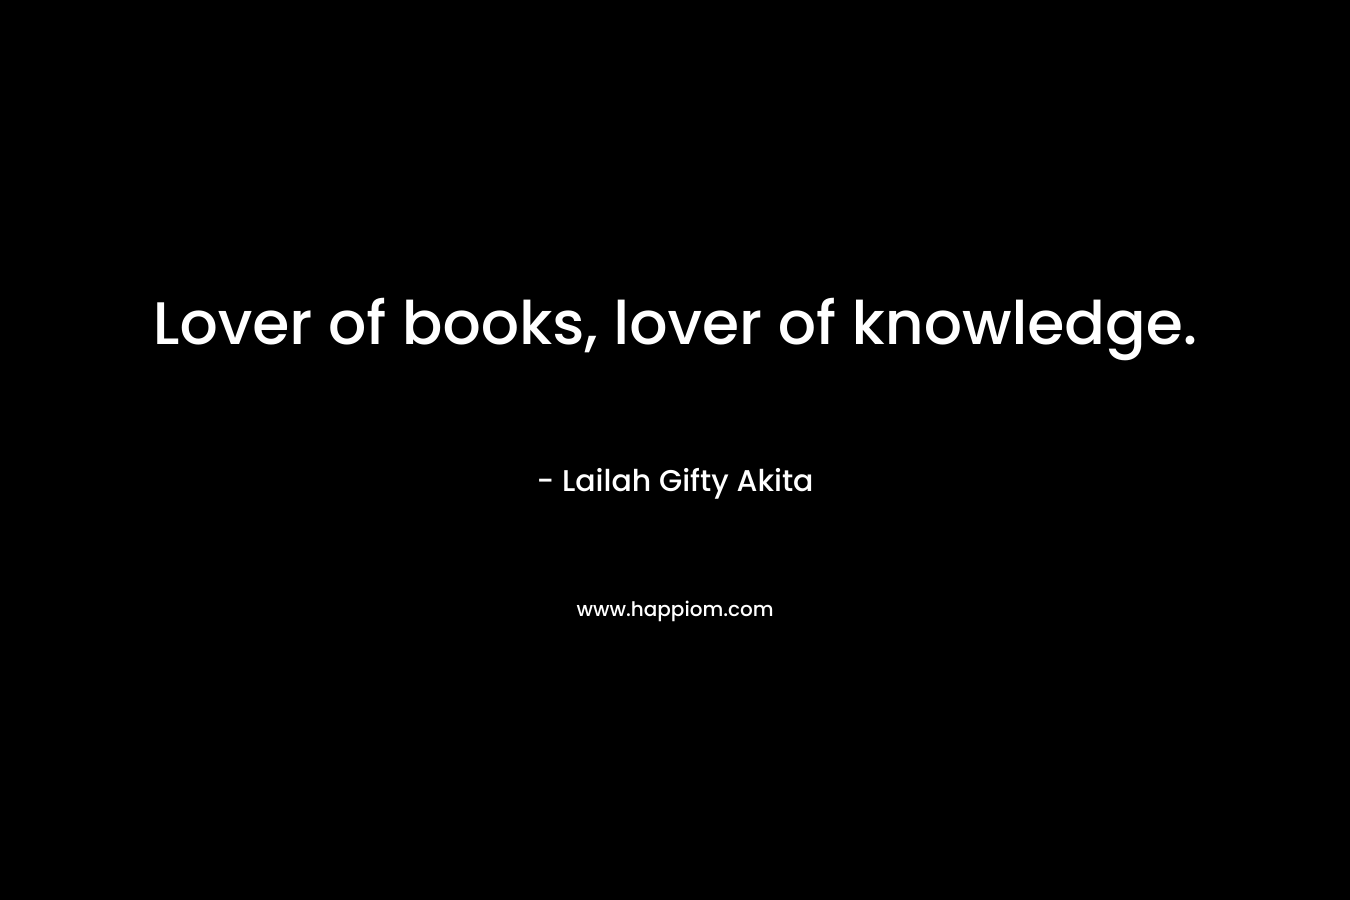 Lover of books, lover of knowledge.